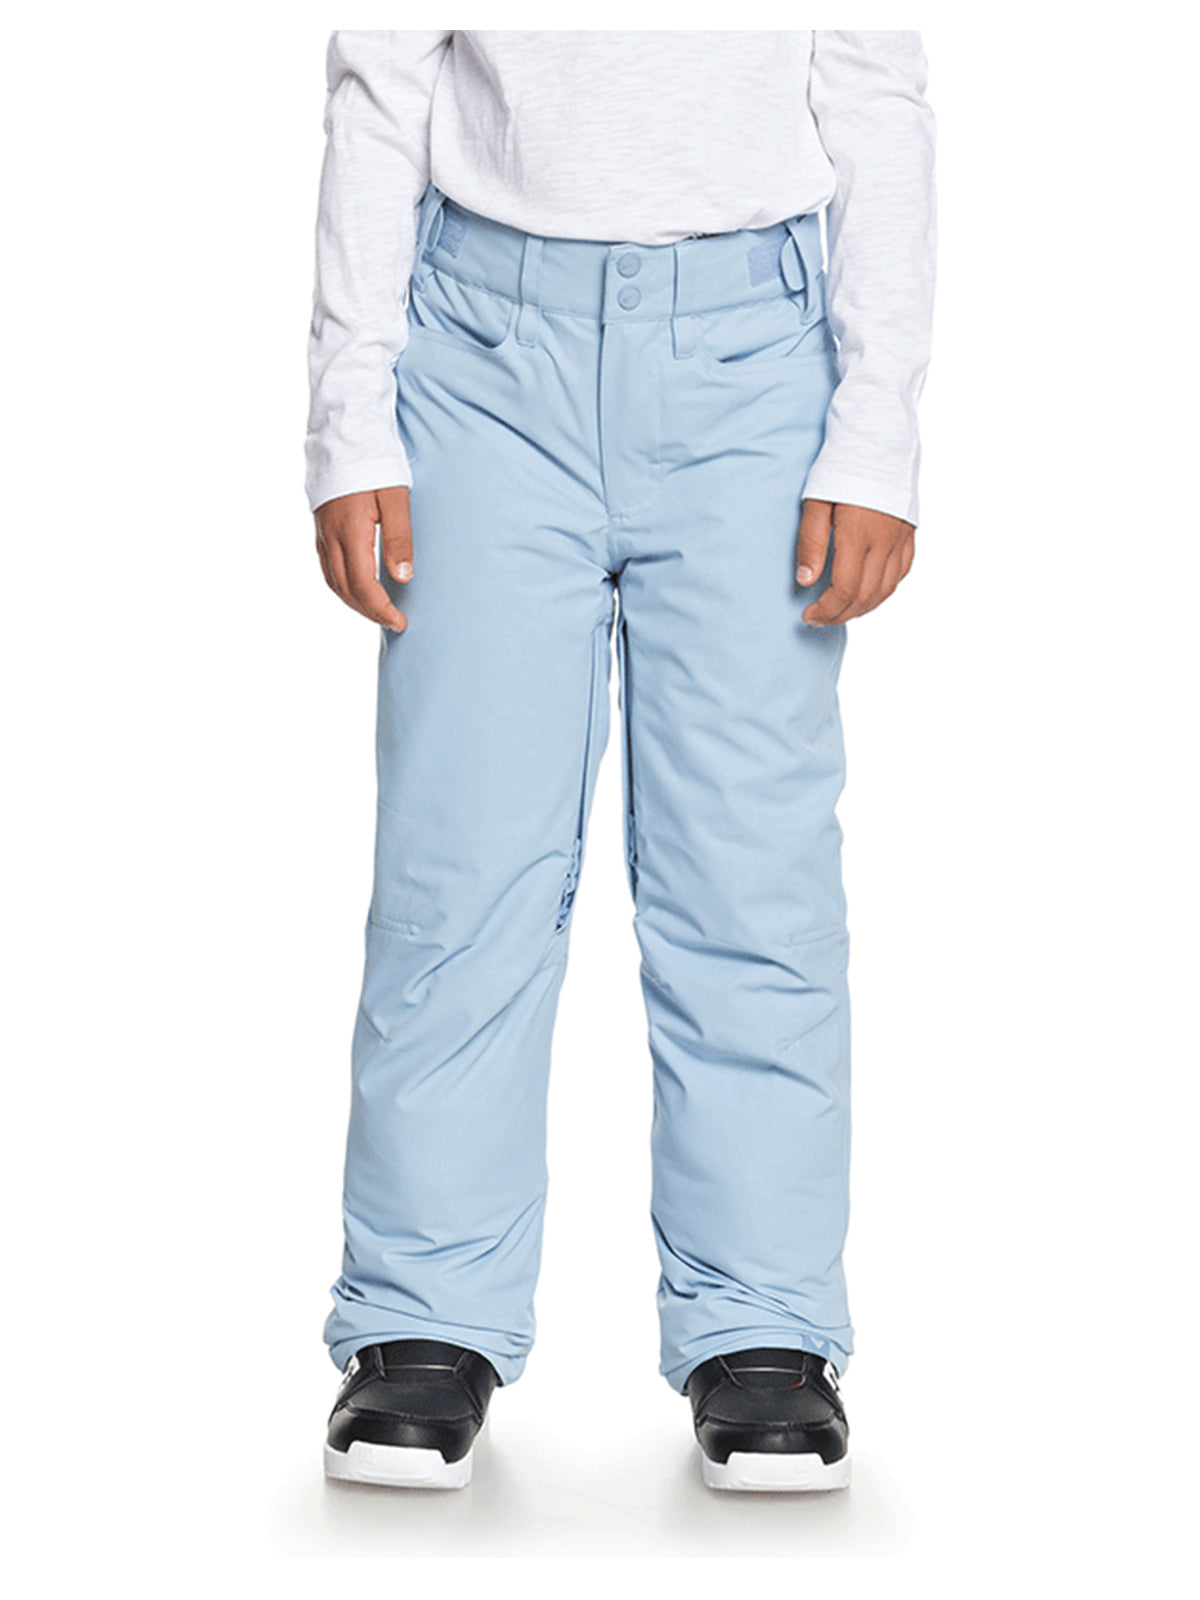 Roxy Backyard Women's Snow/Ski Trousers, Bright White, FR: S  (Manufacturer's Size: S) : Roxy: : Clothing, Shoes & Accessories